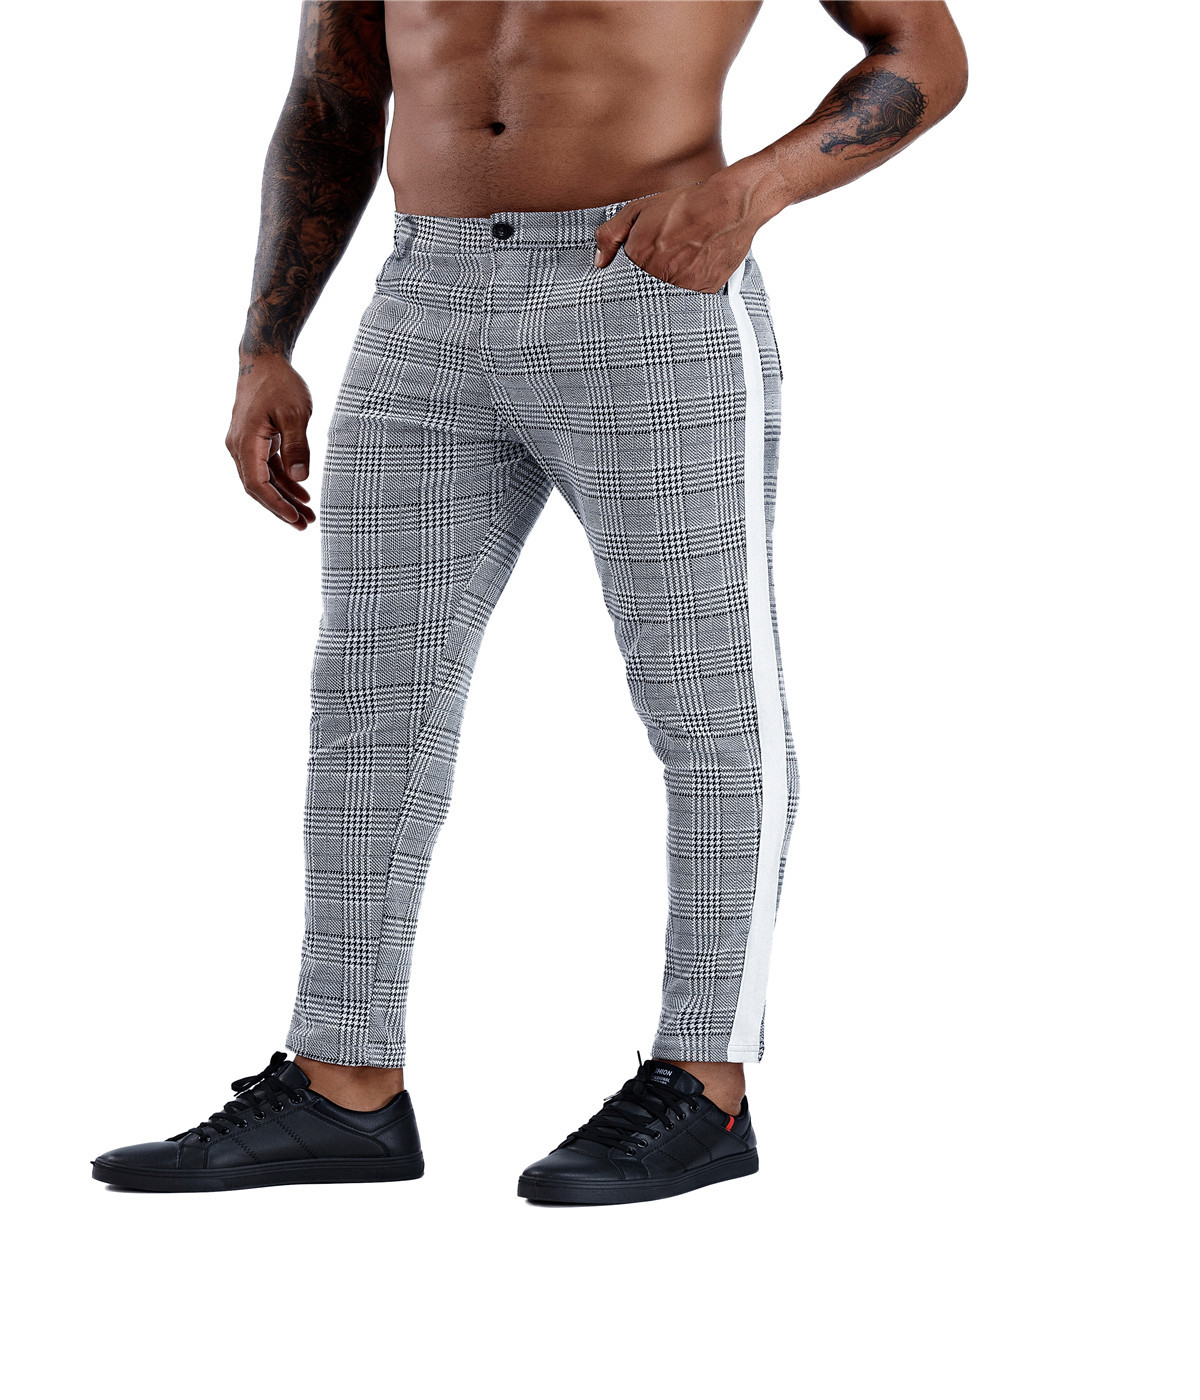 8ac0f7af 2394 45bf 957e df32abec17df - Tapered leg men's checkered trousers